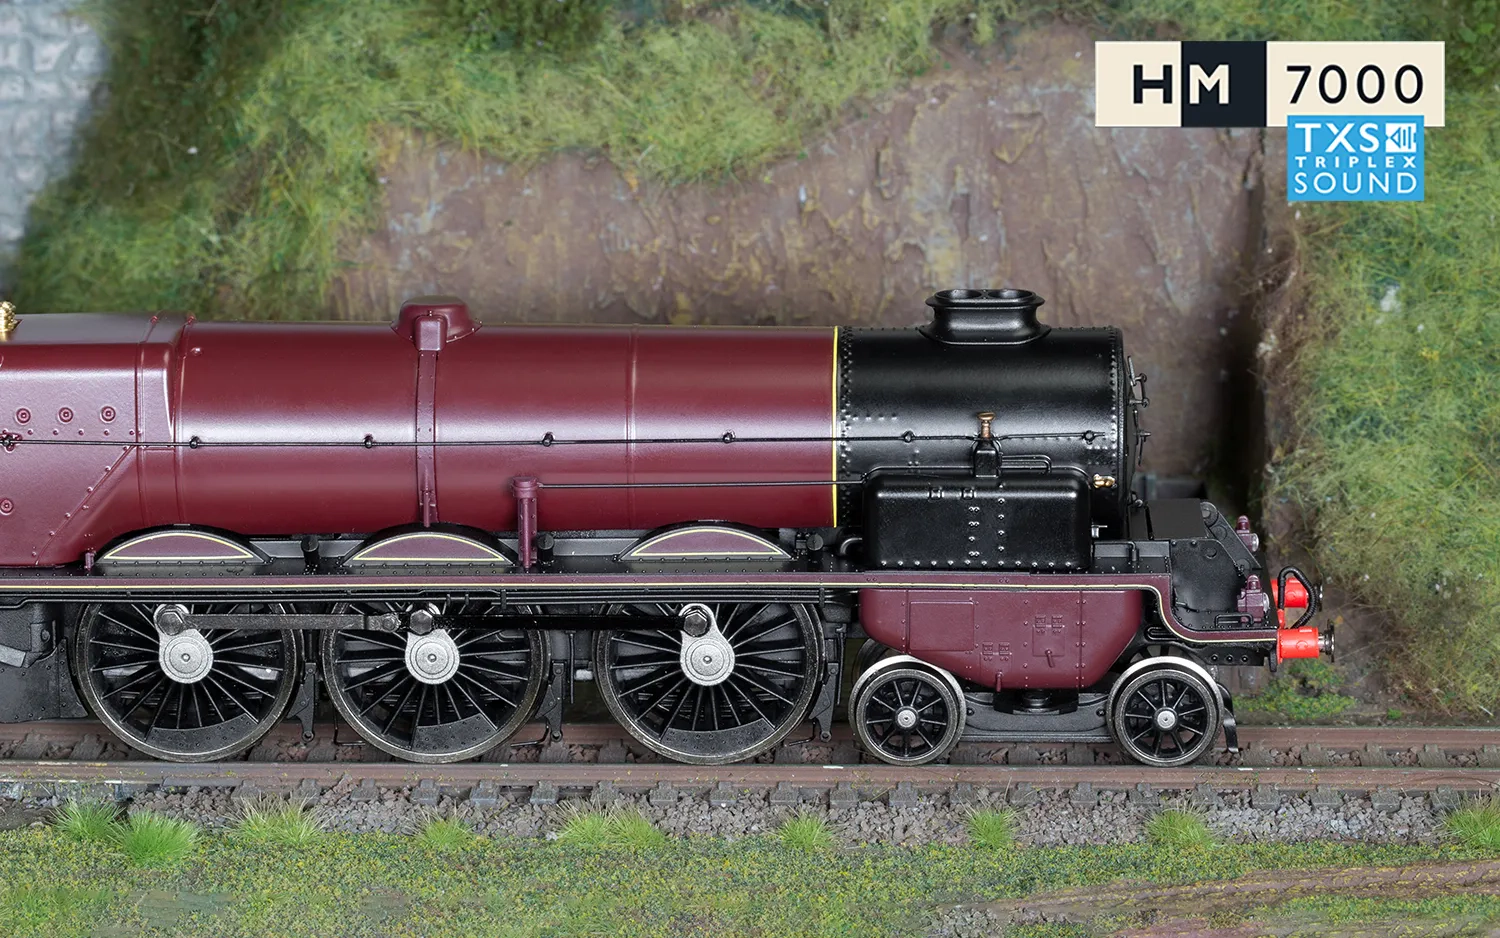 LMS, Princess Royal Class 'The Turbomotive', 4-6-2, 6202 - Era 3 (Sound Fitted)